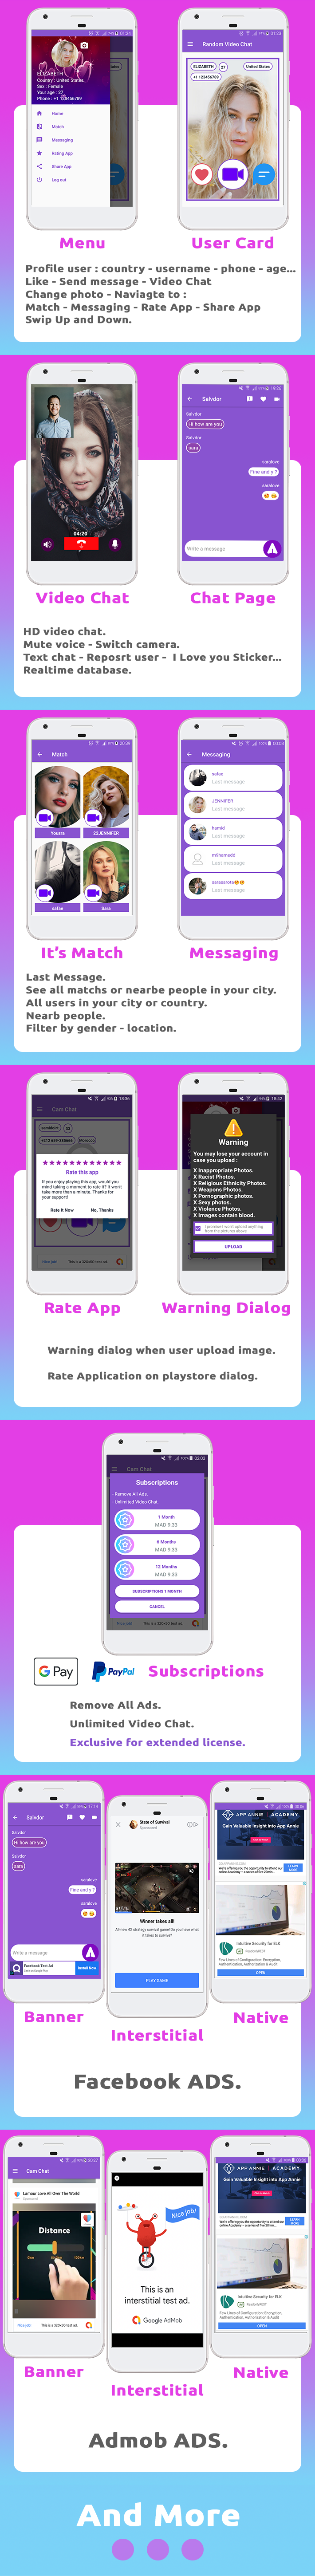 CamChat v4.7 - Dating, Match, Meet New People, Video Call + In-App Purchases + Ads + Admin Panel - 4